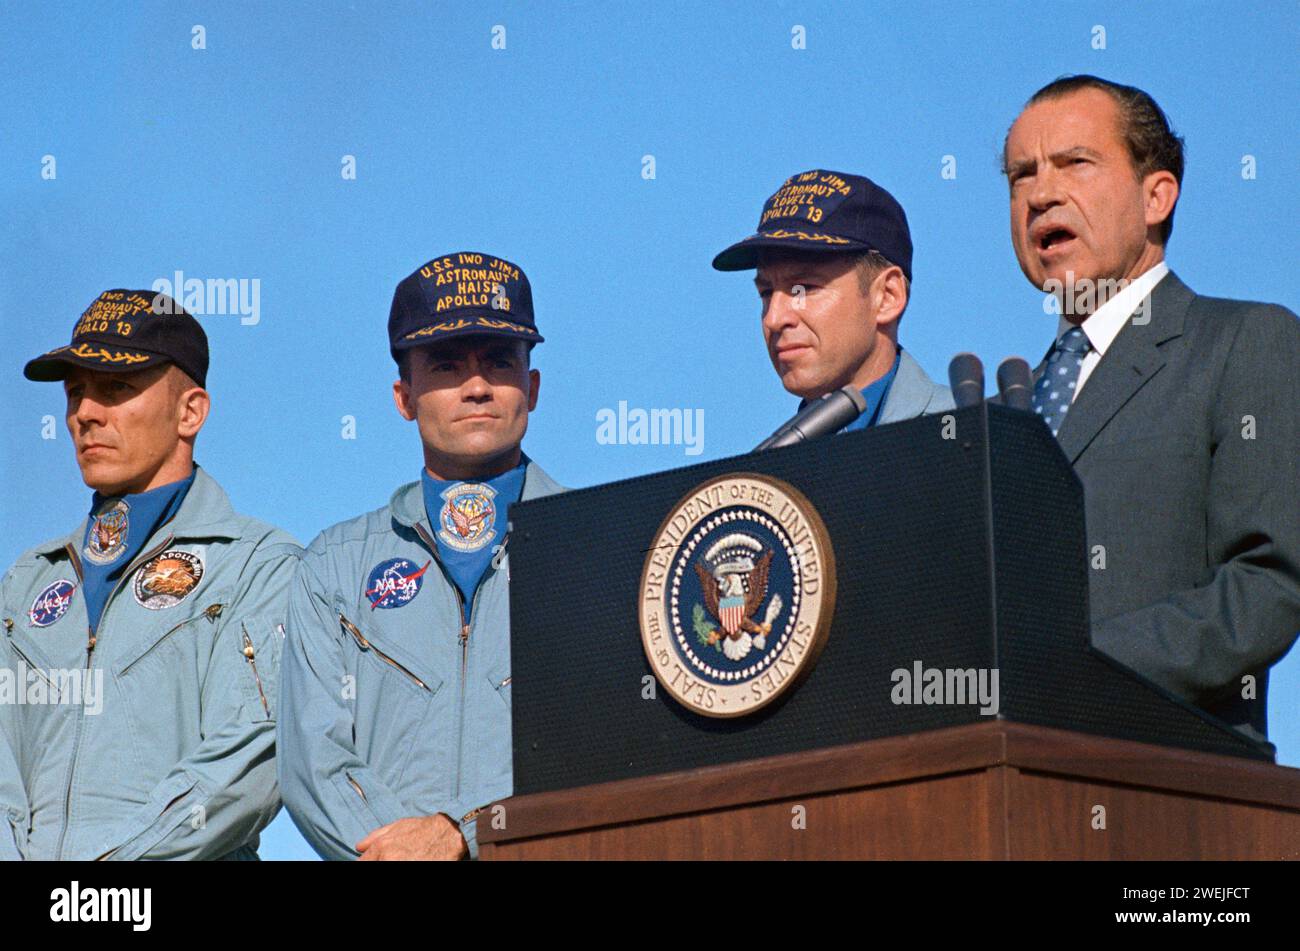 U.S. President Richard M. Nixon and astronauts  (l-r) John L. Swigert Jr., command module pilot; Fred W. Haise Jr., lunar module pilot; James A. Lovell Jr., Apollo 13 commander, during special ceremony to present Apollo 13 crew with Presidential Medal of Freedom, the nation's highest civilian honor, Hickam Air Force Base, Hawaii, USA, NASA, April 18, 1970 Stock Photo